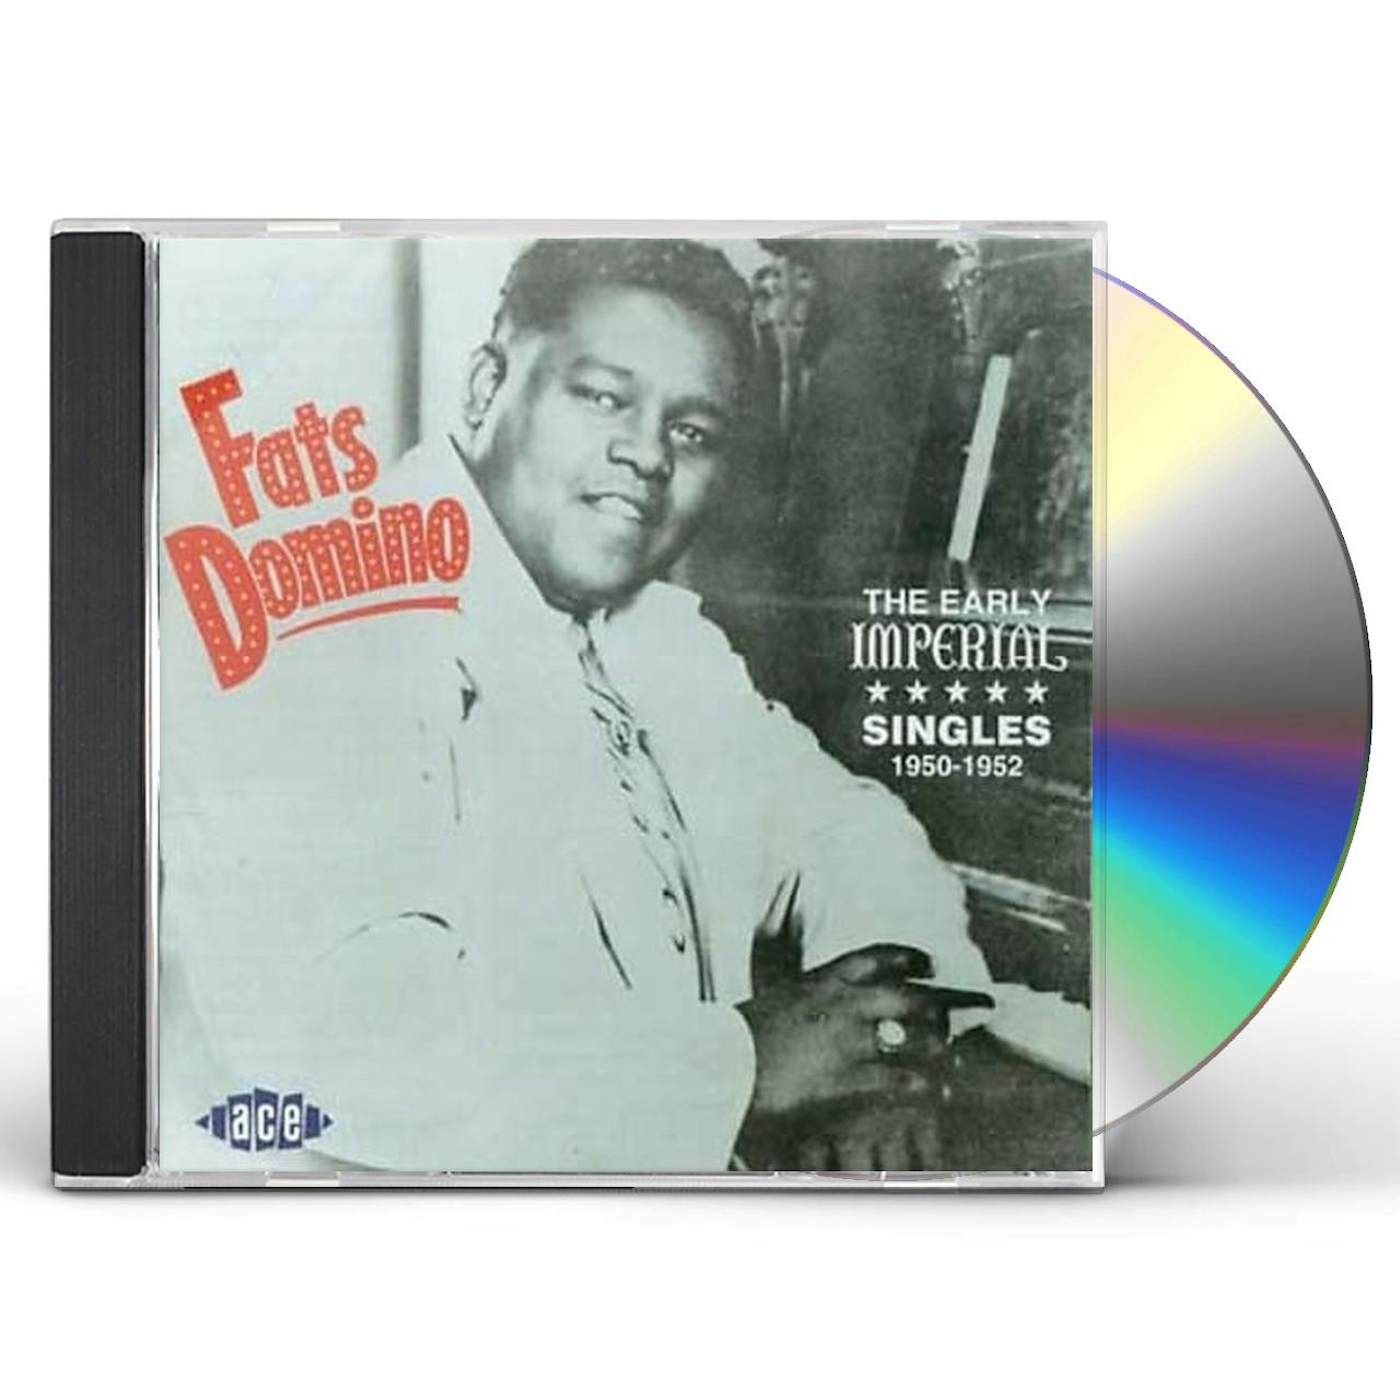 Fats Domino EARLY IMPERIAL SINGLES 1950 - 1952 CD